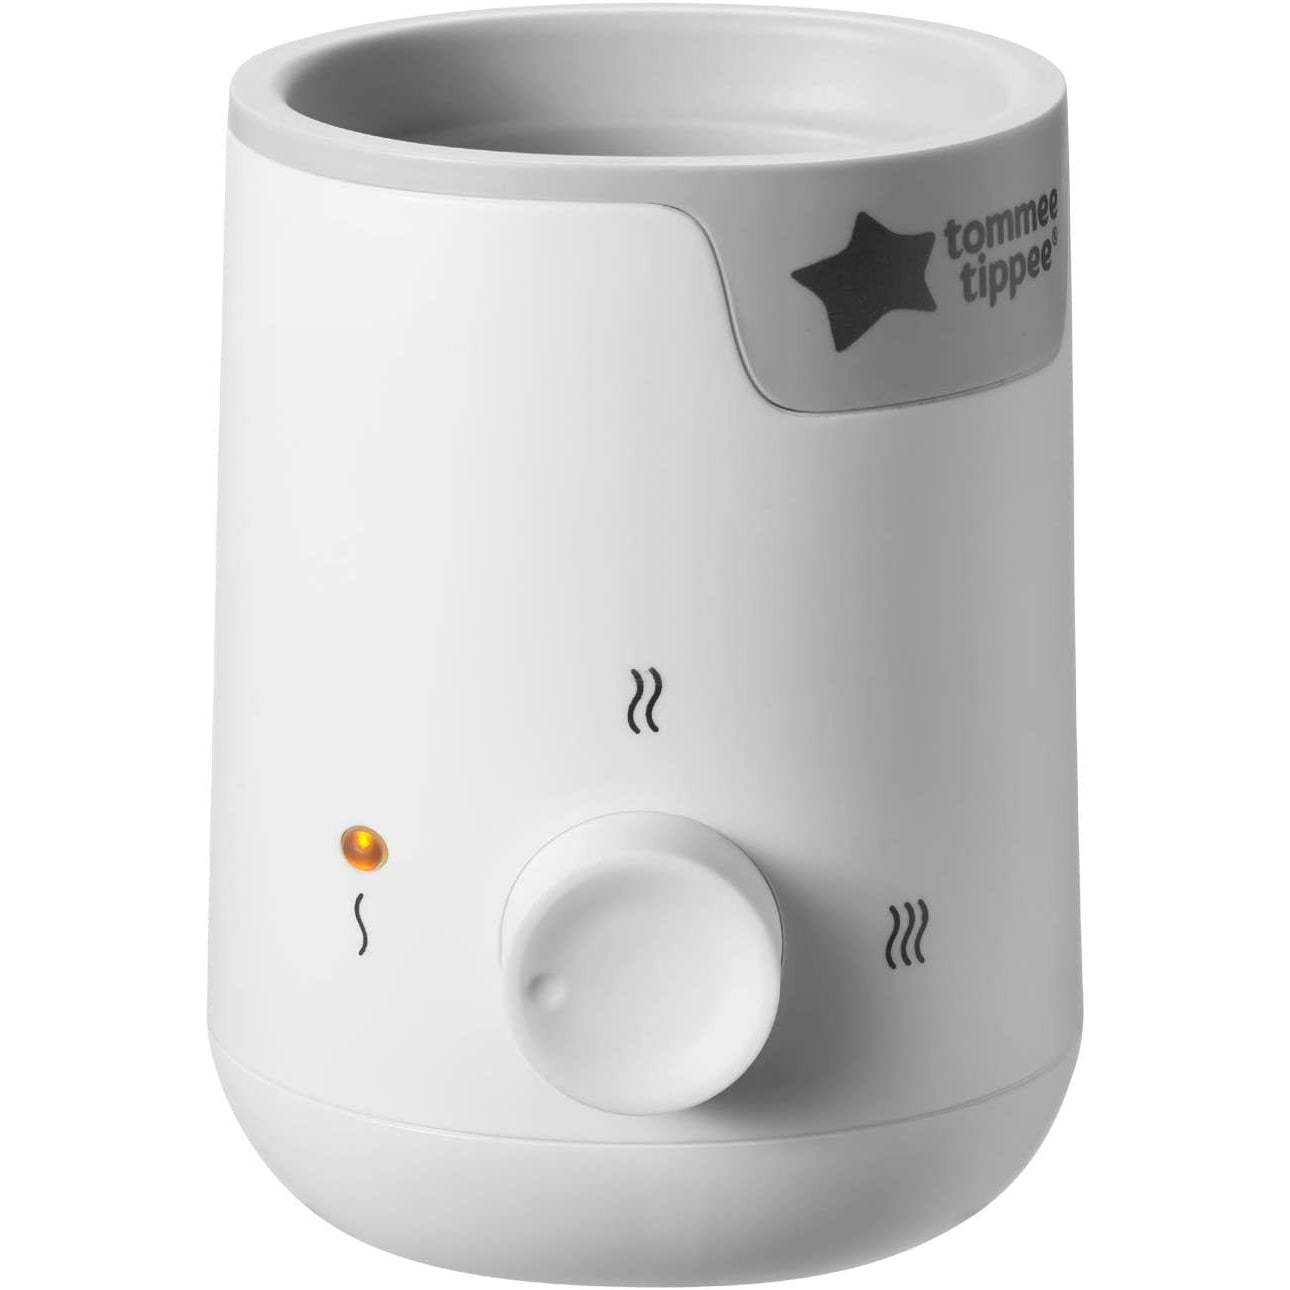 Tommee Tippee Easi-Warm 3-in-1 Advanced Electric Bottle and Food Pouch Warmer, Warms Feeds Fast, White